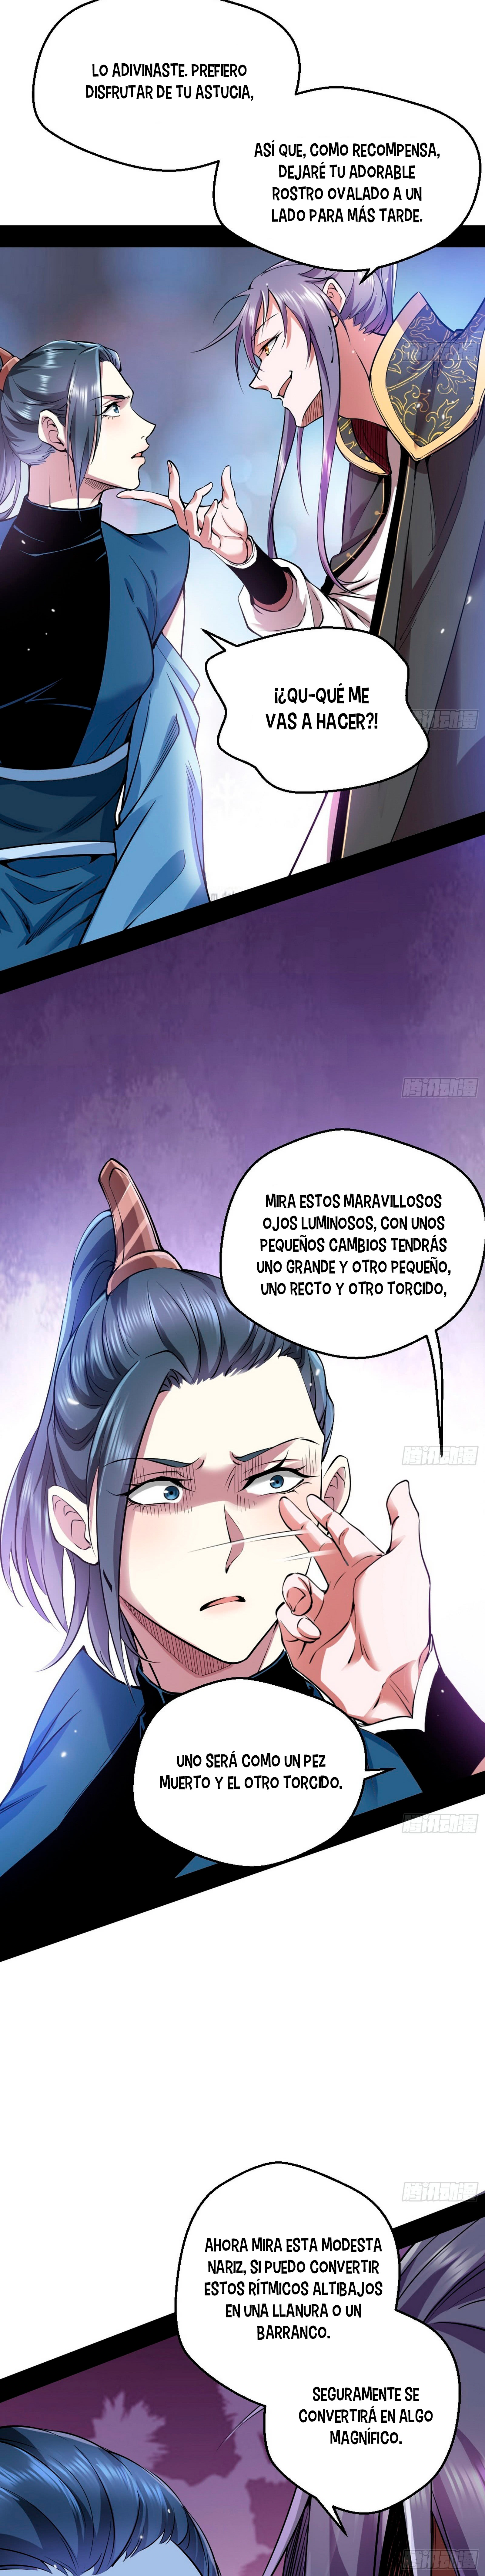 Manga Soy un dios maligno Chapter 45 image number 26